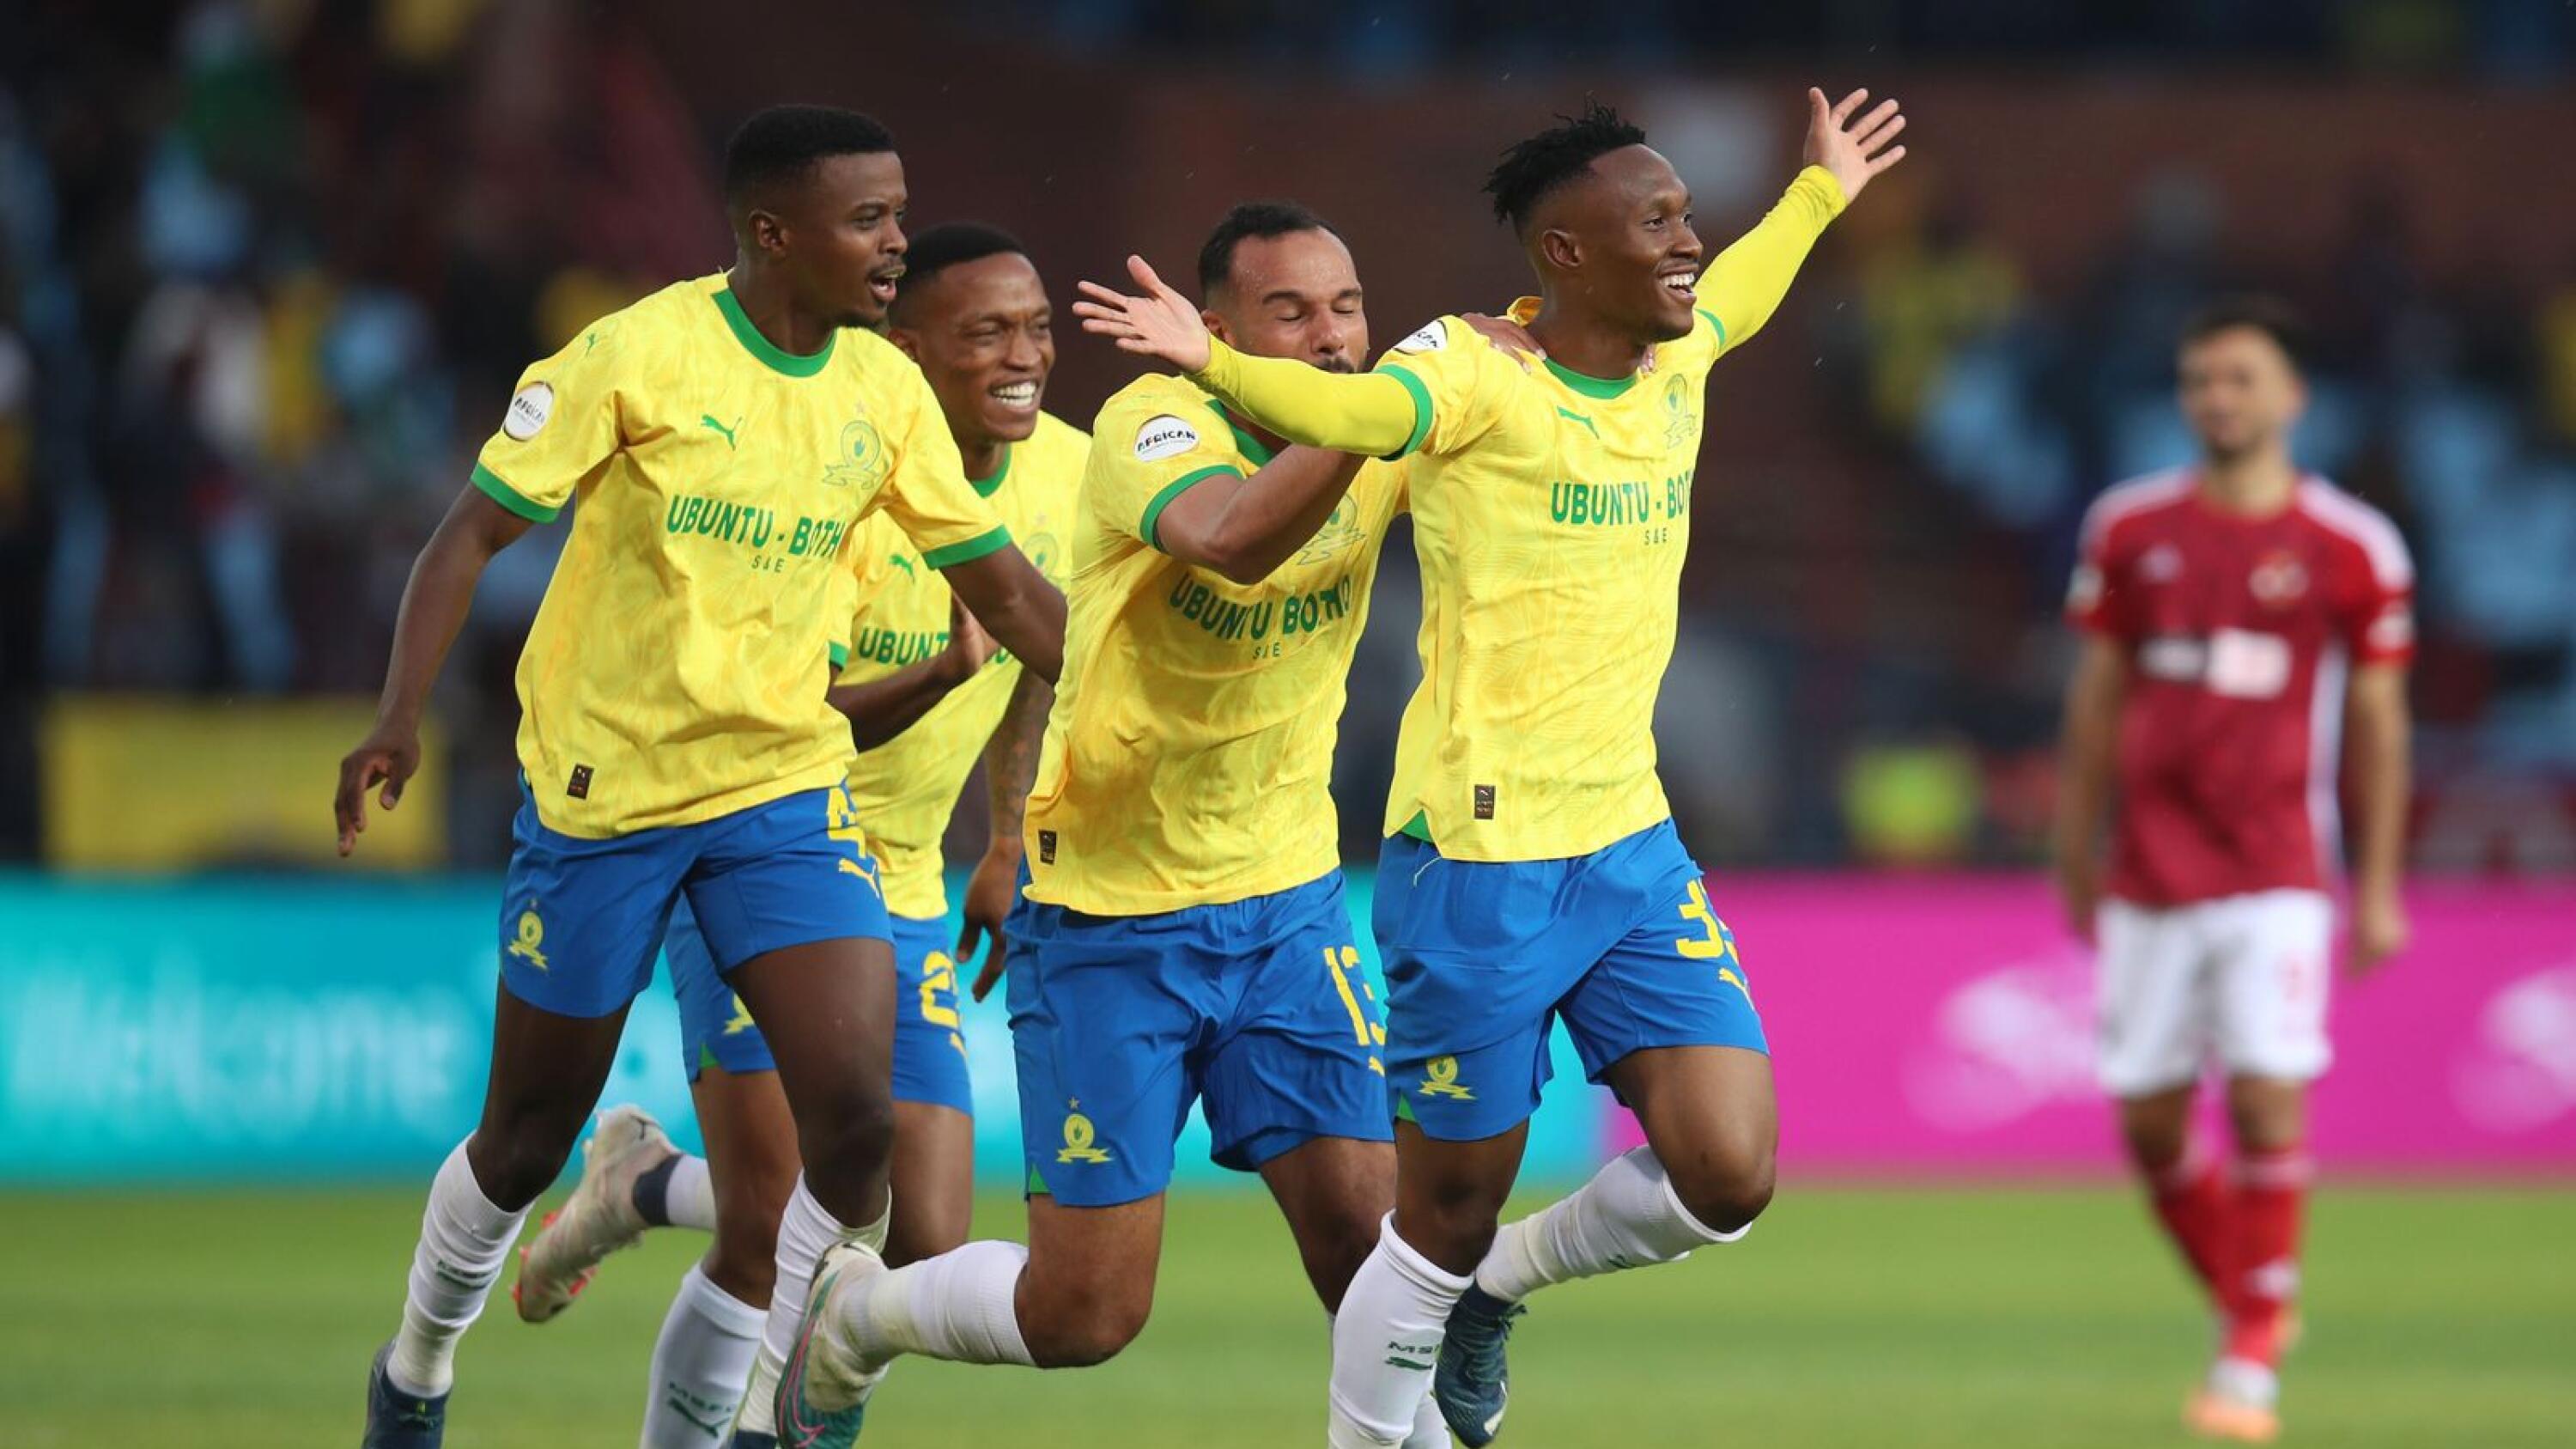 Mamelodi Sundowns’ Thapelo Maseko celebrates with teammates after scoring a goal during their African Football League match against Al Ahly